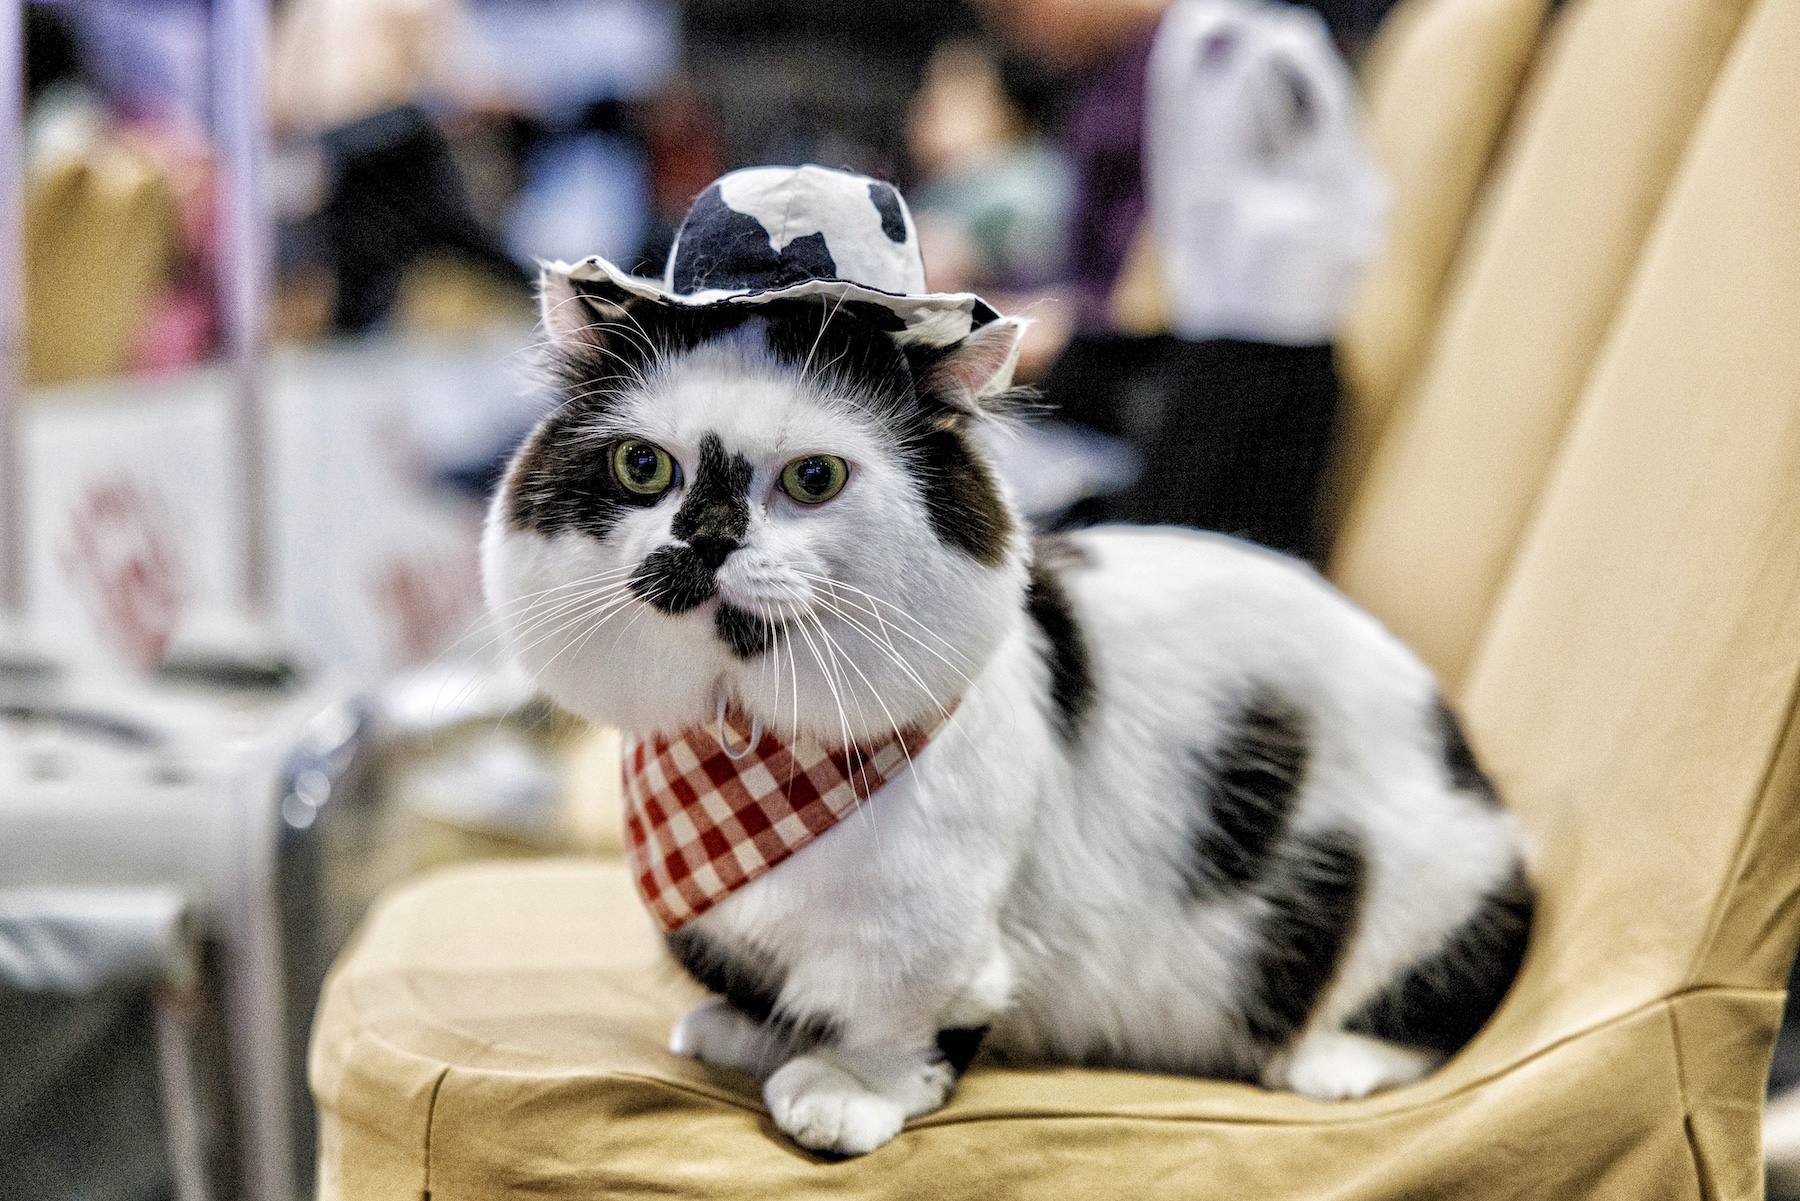 Thailand Held A “Cats Who Look Like Cows” Competition Where Cats Were Judged On Resemblance To Cows